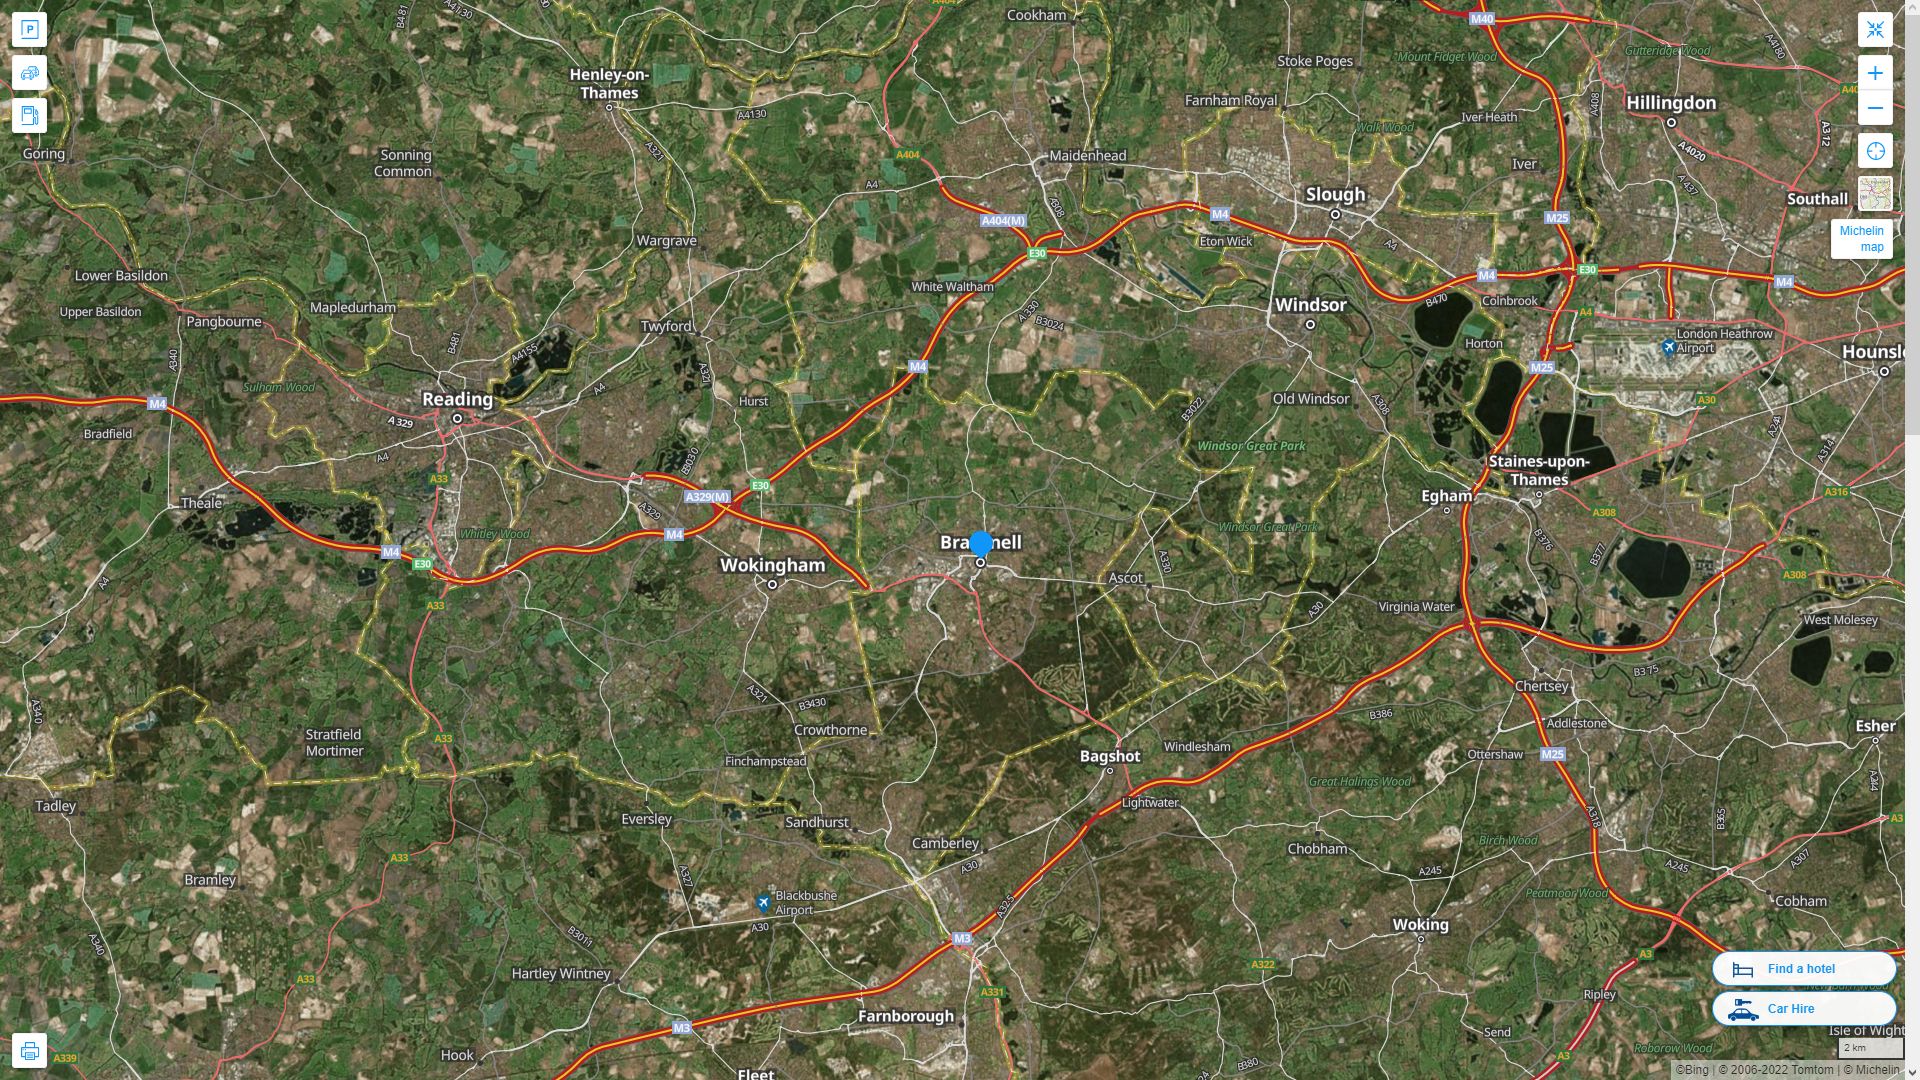 Bracknell Highway and Road Map with Satellite View